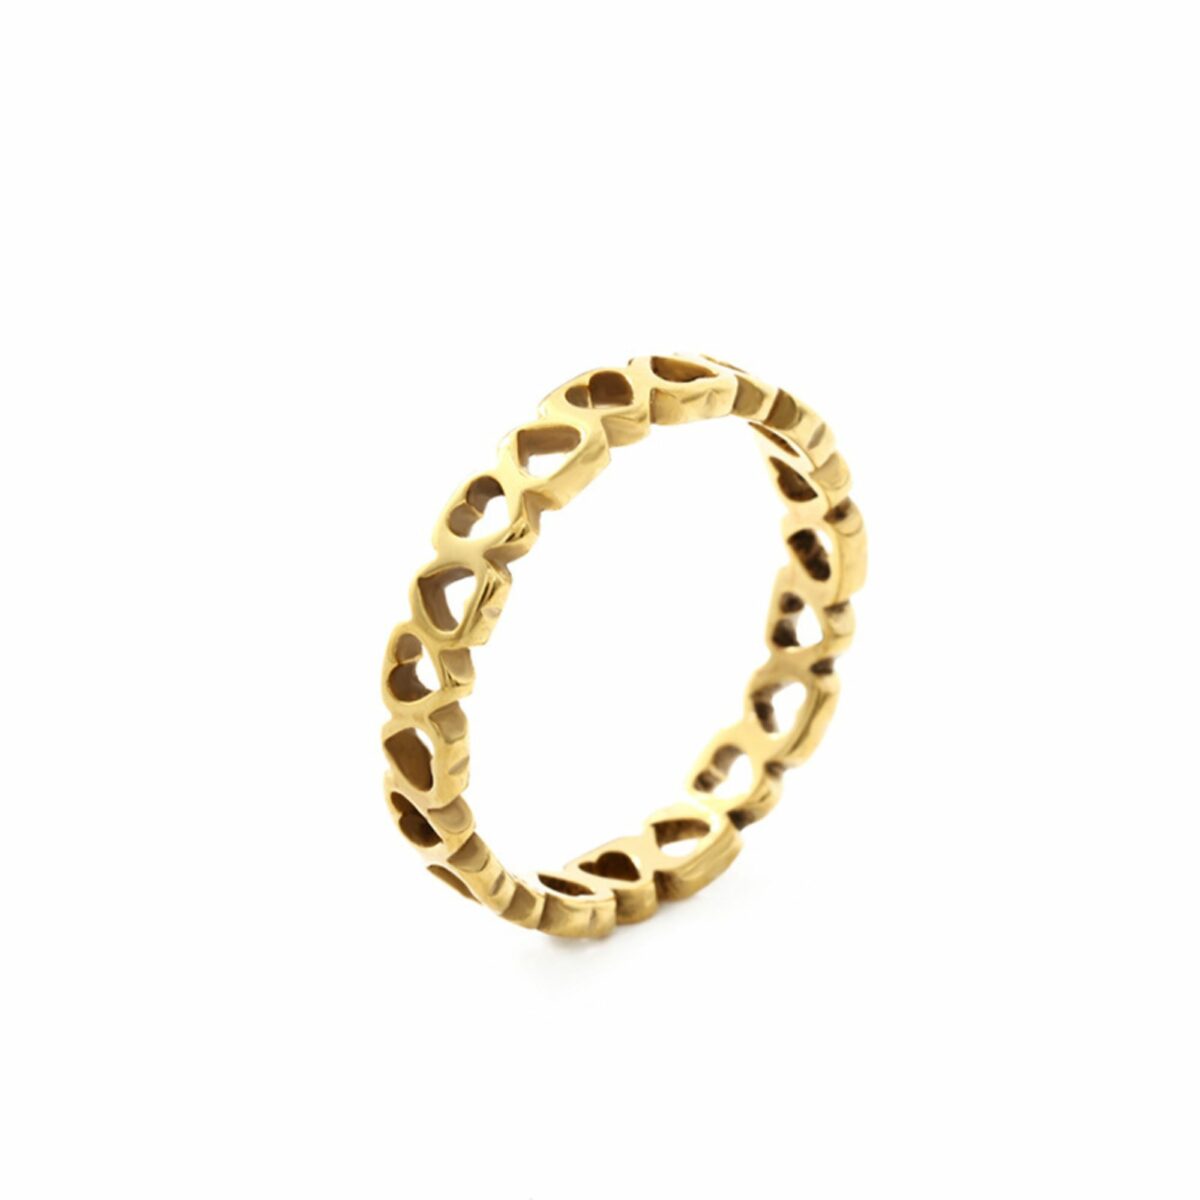 https://m.clubbella.co/product/gold-infinity-heart-ring/ 1674978350808